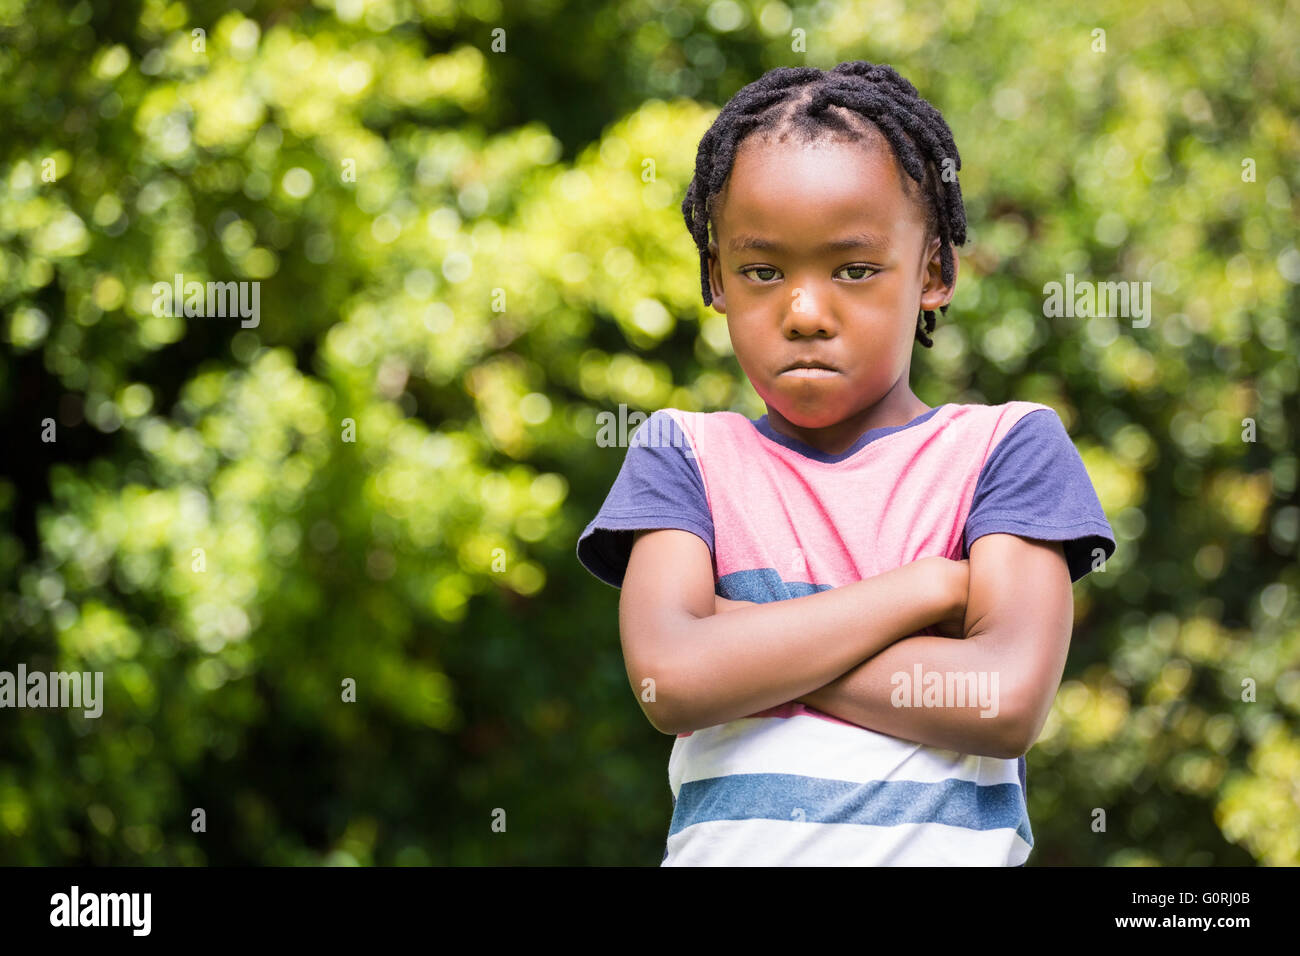 Angry boy with arms crossed Stock Photo